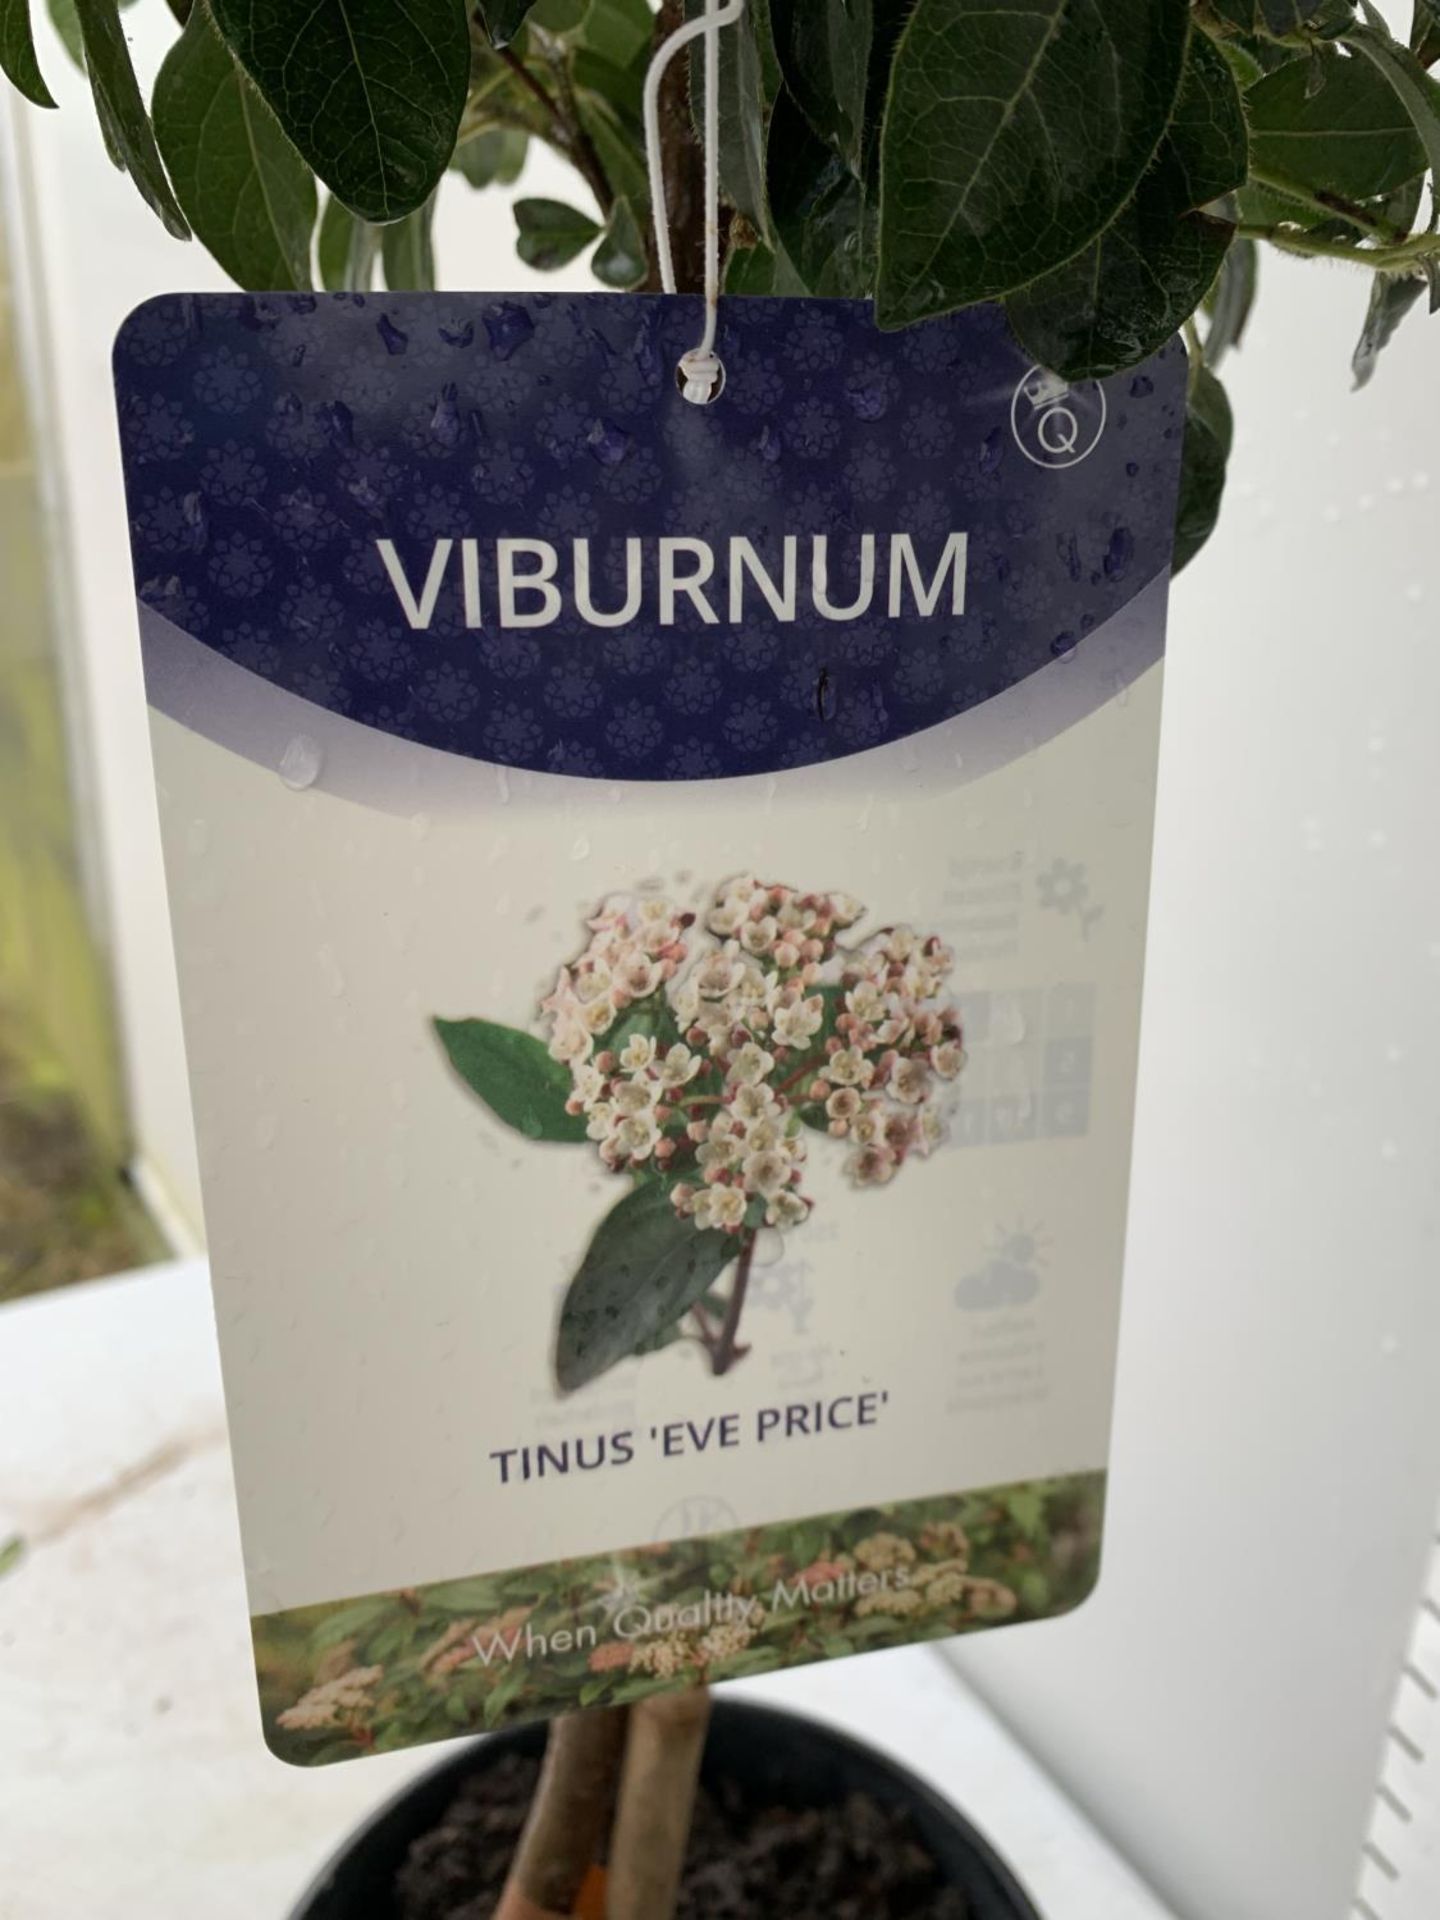 TWO VIBURNUM 'EVE PRICE' STANDARD TREES APPROX 110CM IN HEIGHT IN 5 LTR POTS PLUS VAT TO BE SOLD FOR - Image 7 of 8